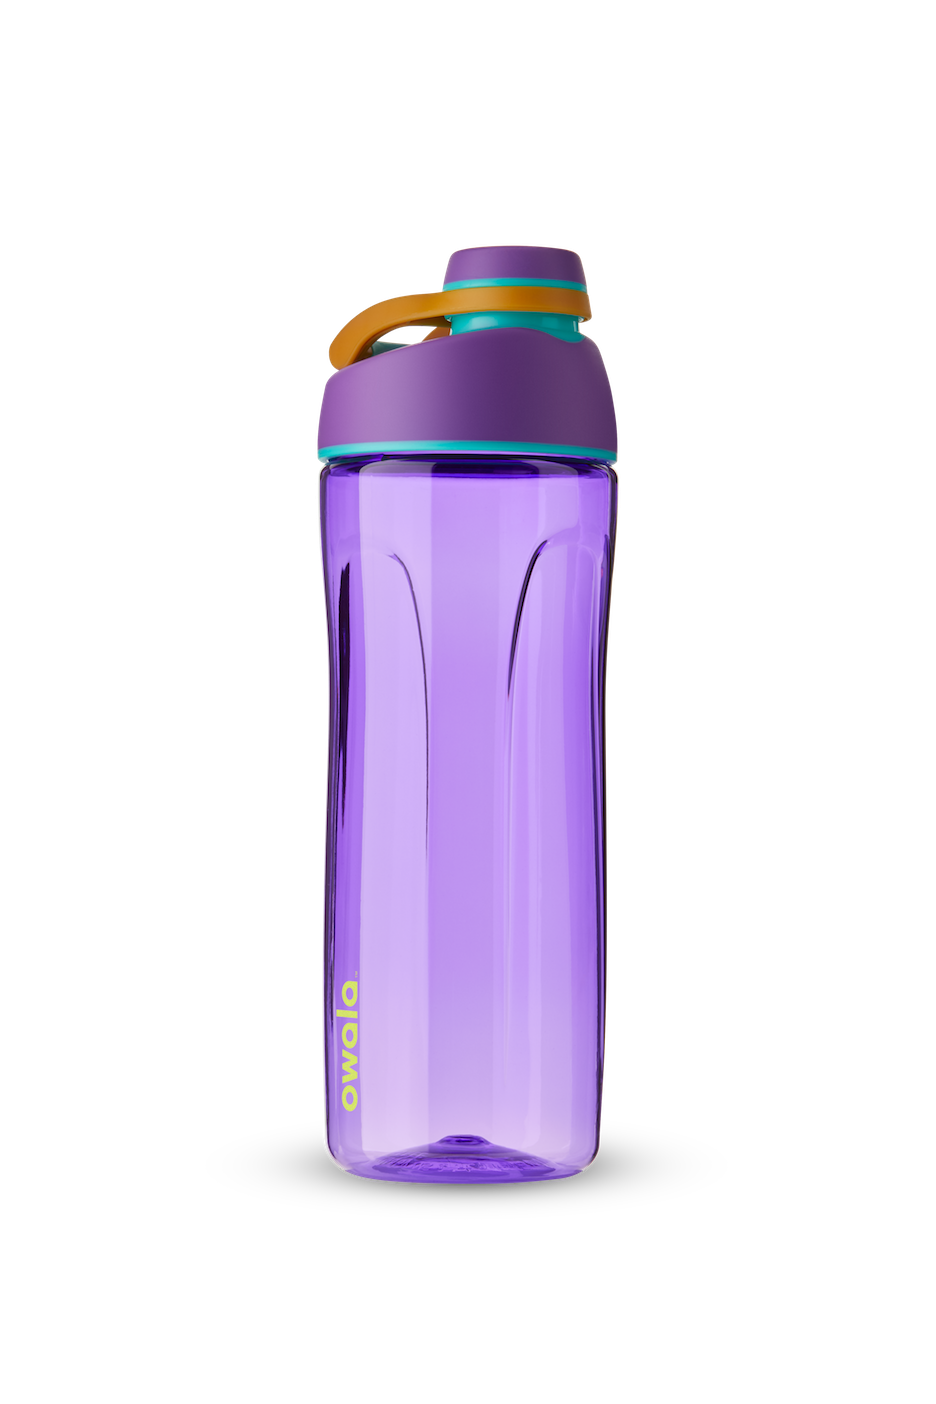 Owala 25 oz Purple Plastic Water Bottle with Flip-Top and Straw Lid 